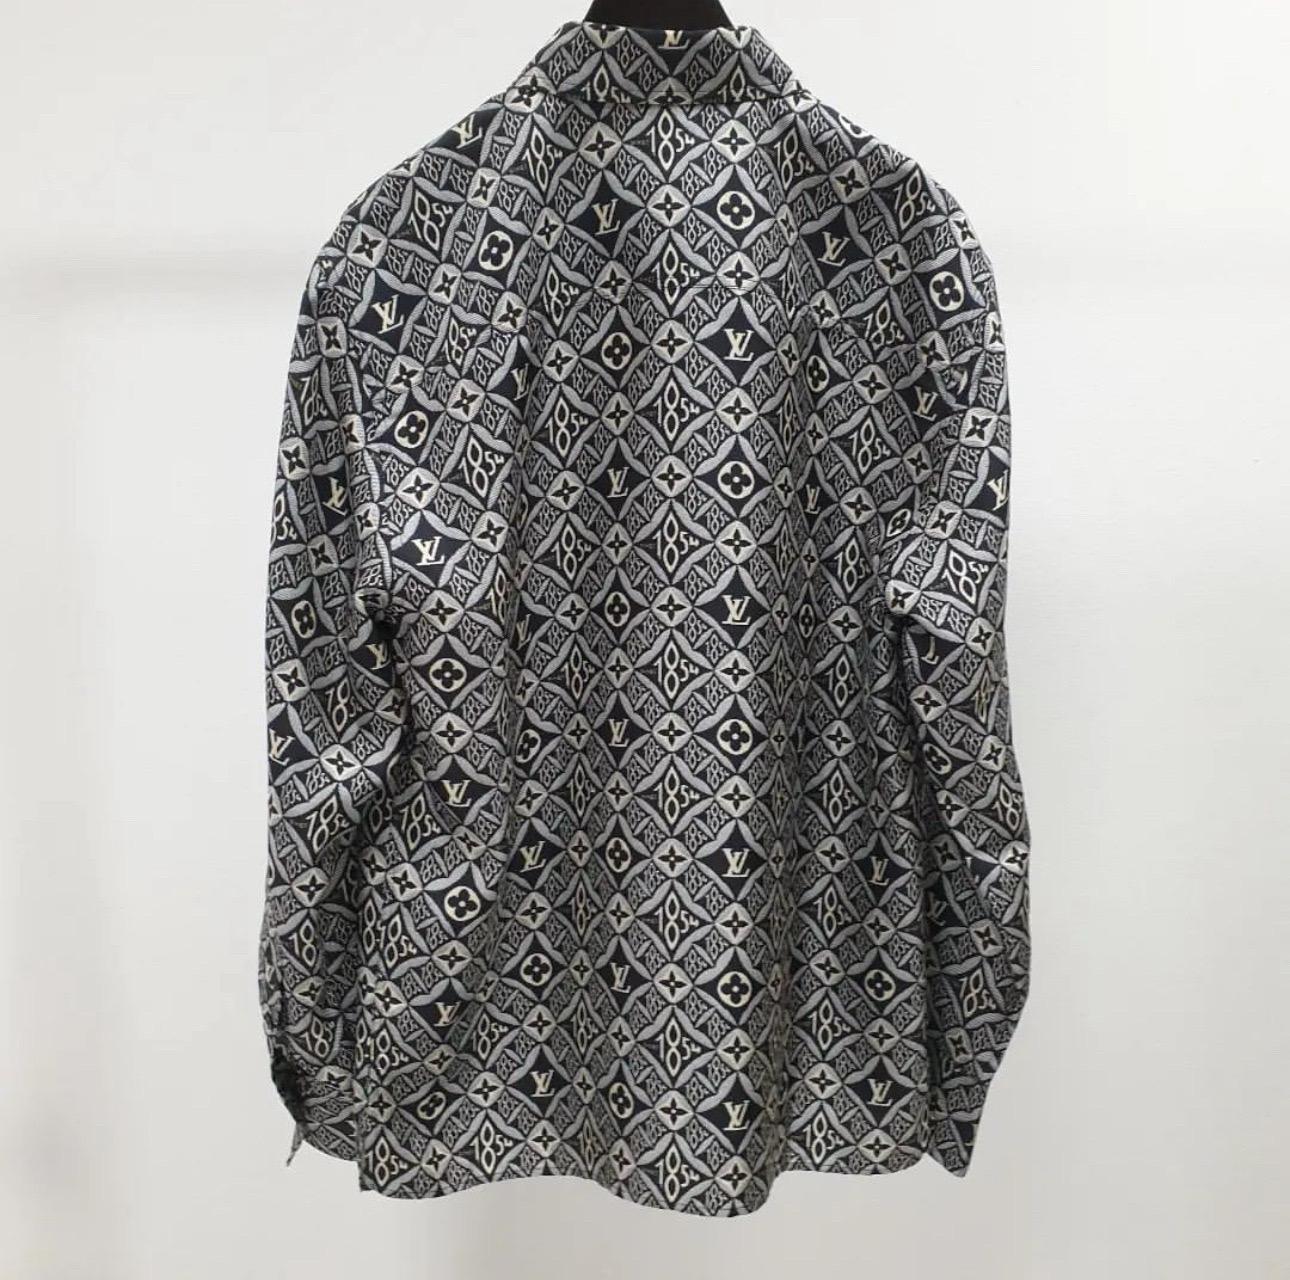 100% authentic Louis Vuitton Since 1843 blouse in black and ivory silk (100%). 
Features all-over monogram print and pointed collar. 
Closes with buttons down the front. Has been worn and is in excellent condition. 
2020 Fall/Winter 
As seen on